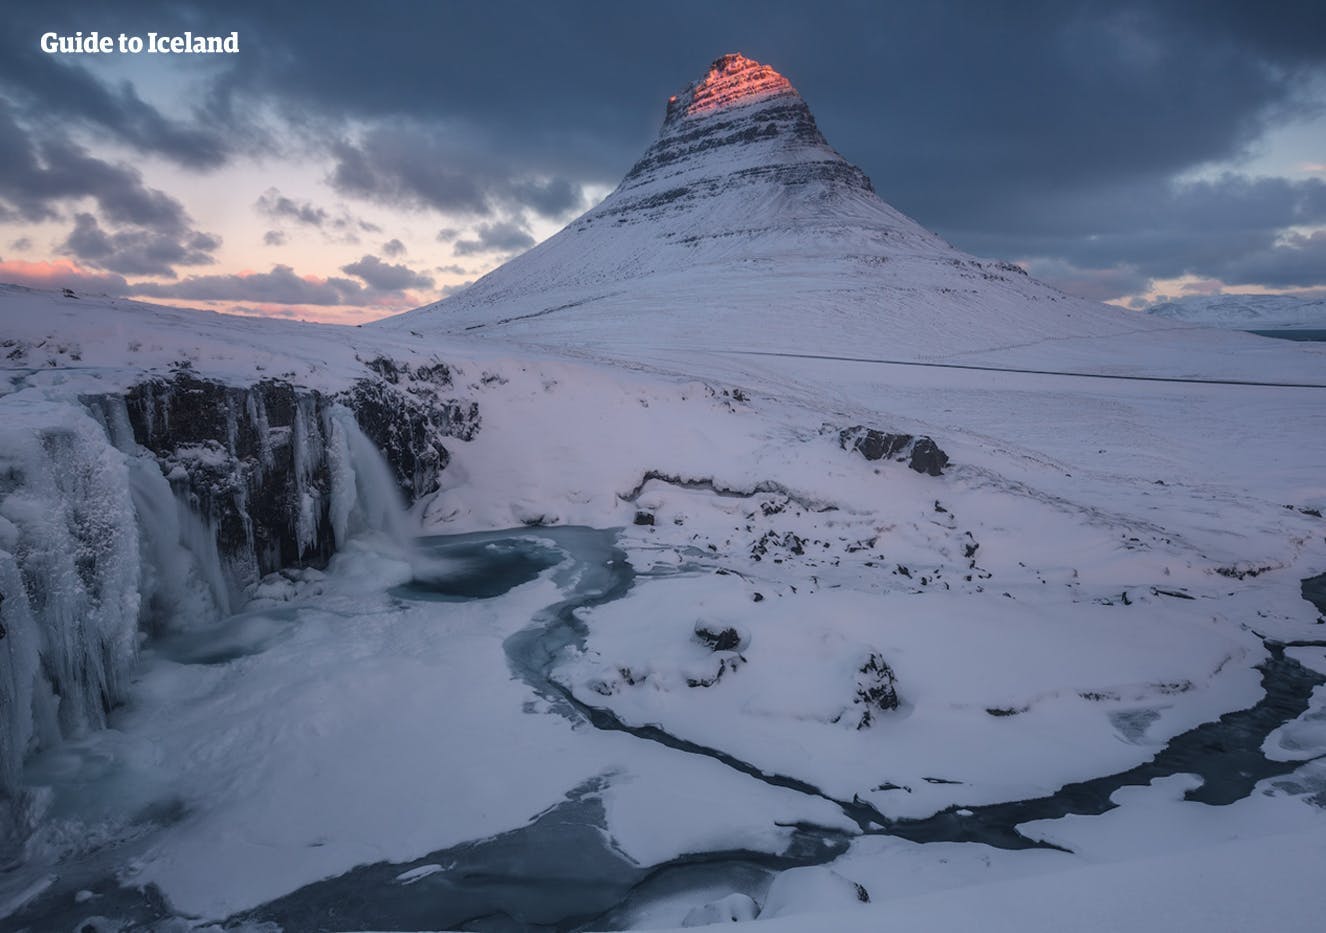 Kirkjufell Mountain on the Snæfellsnes Peninsula, as seen in the cold winter months.